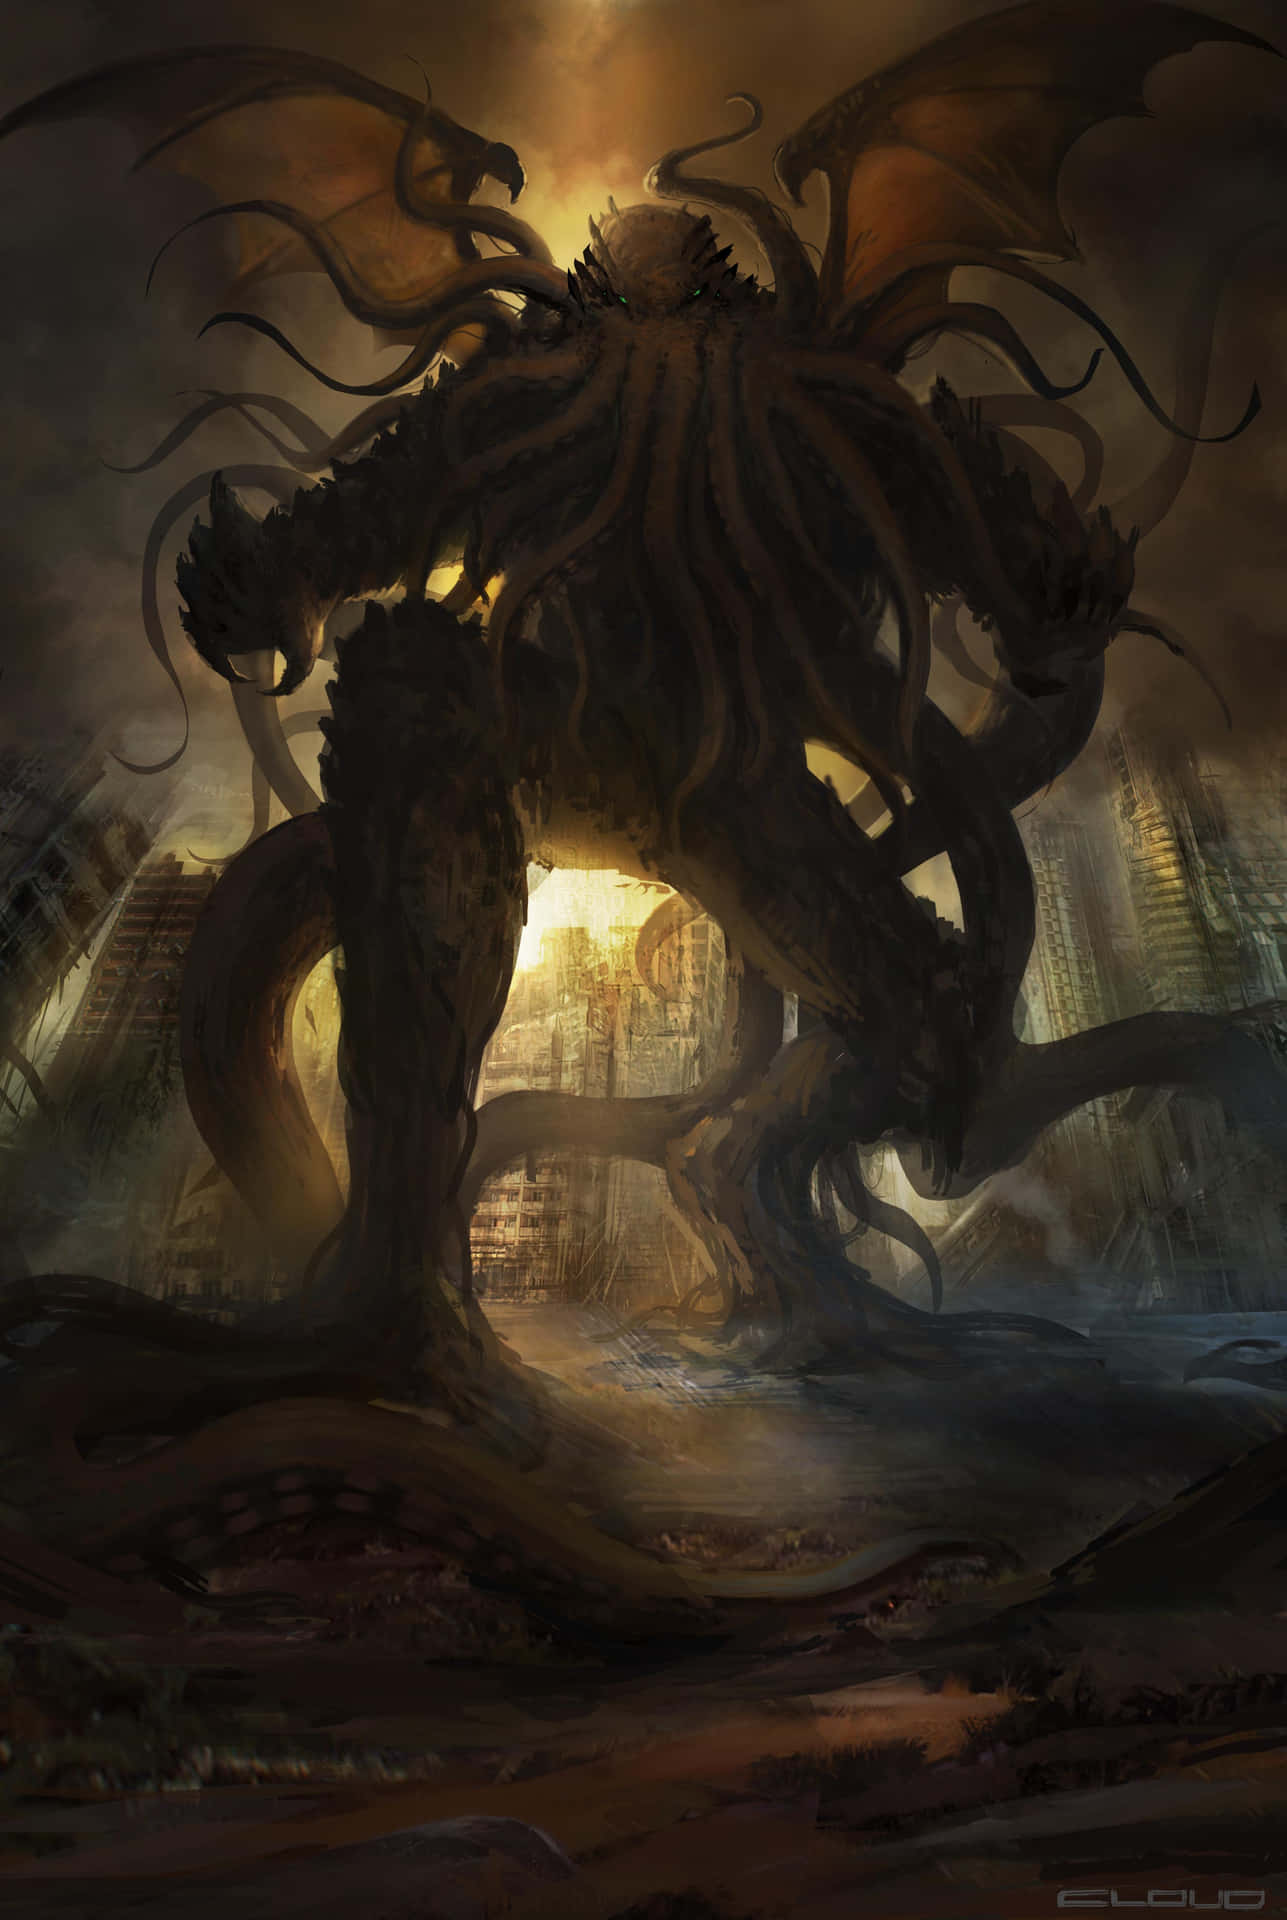 The Unspeakable Horror – Cthulhu